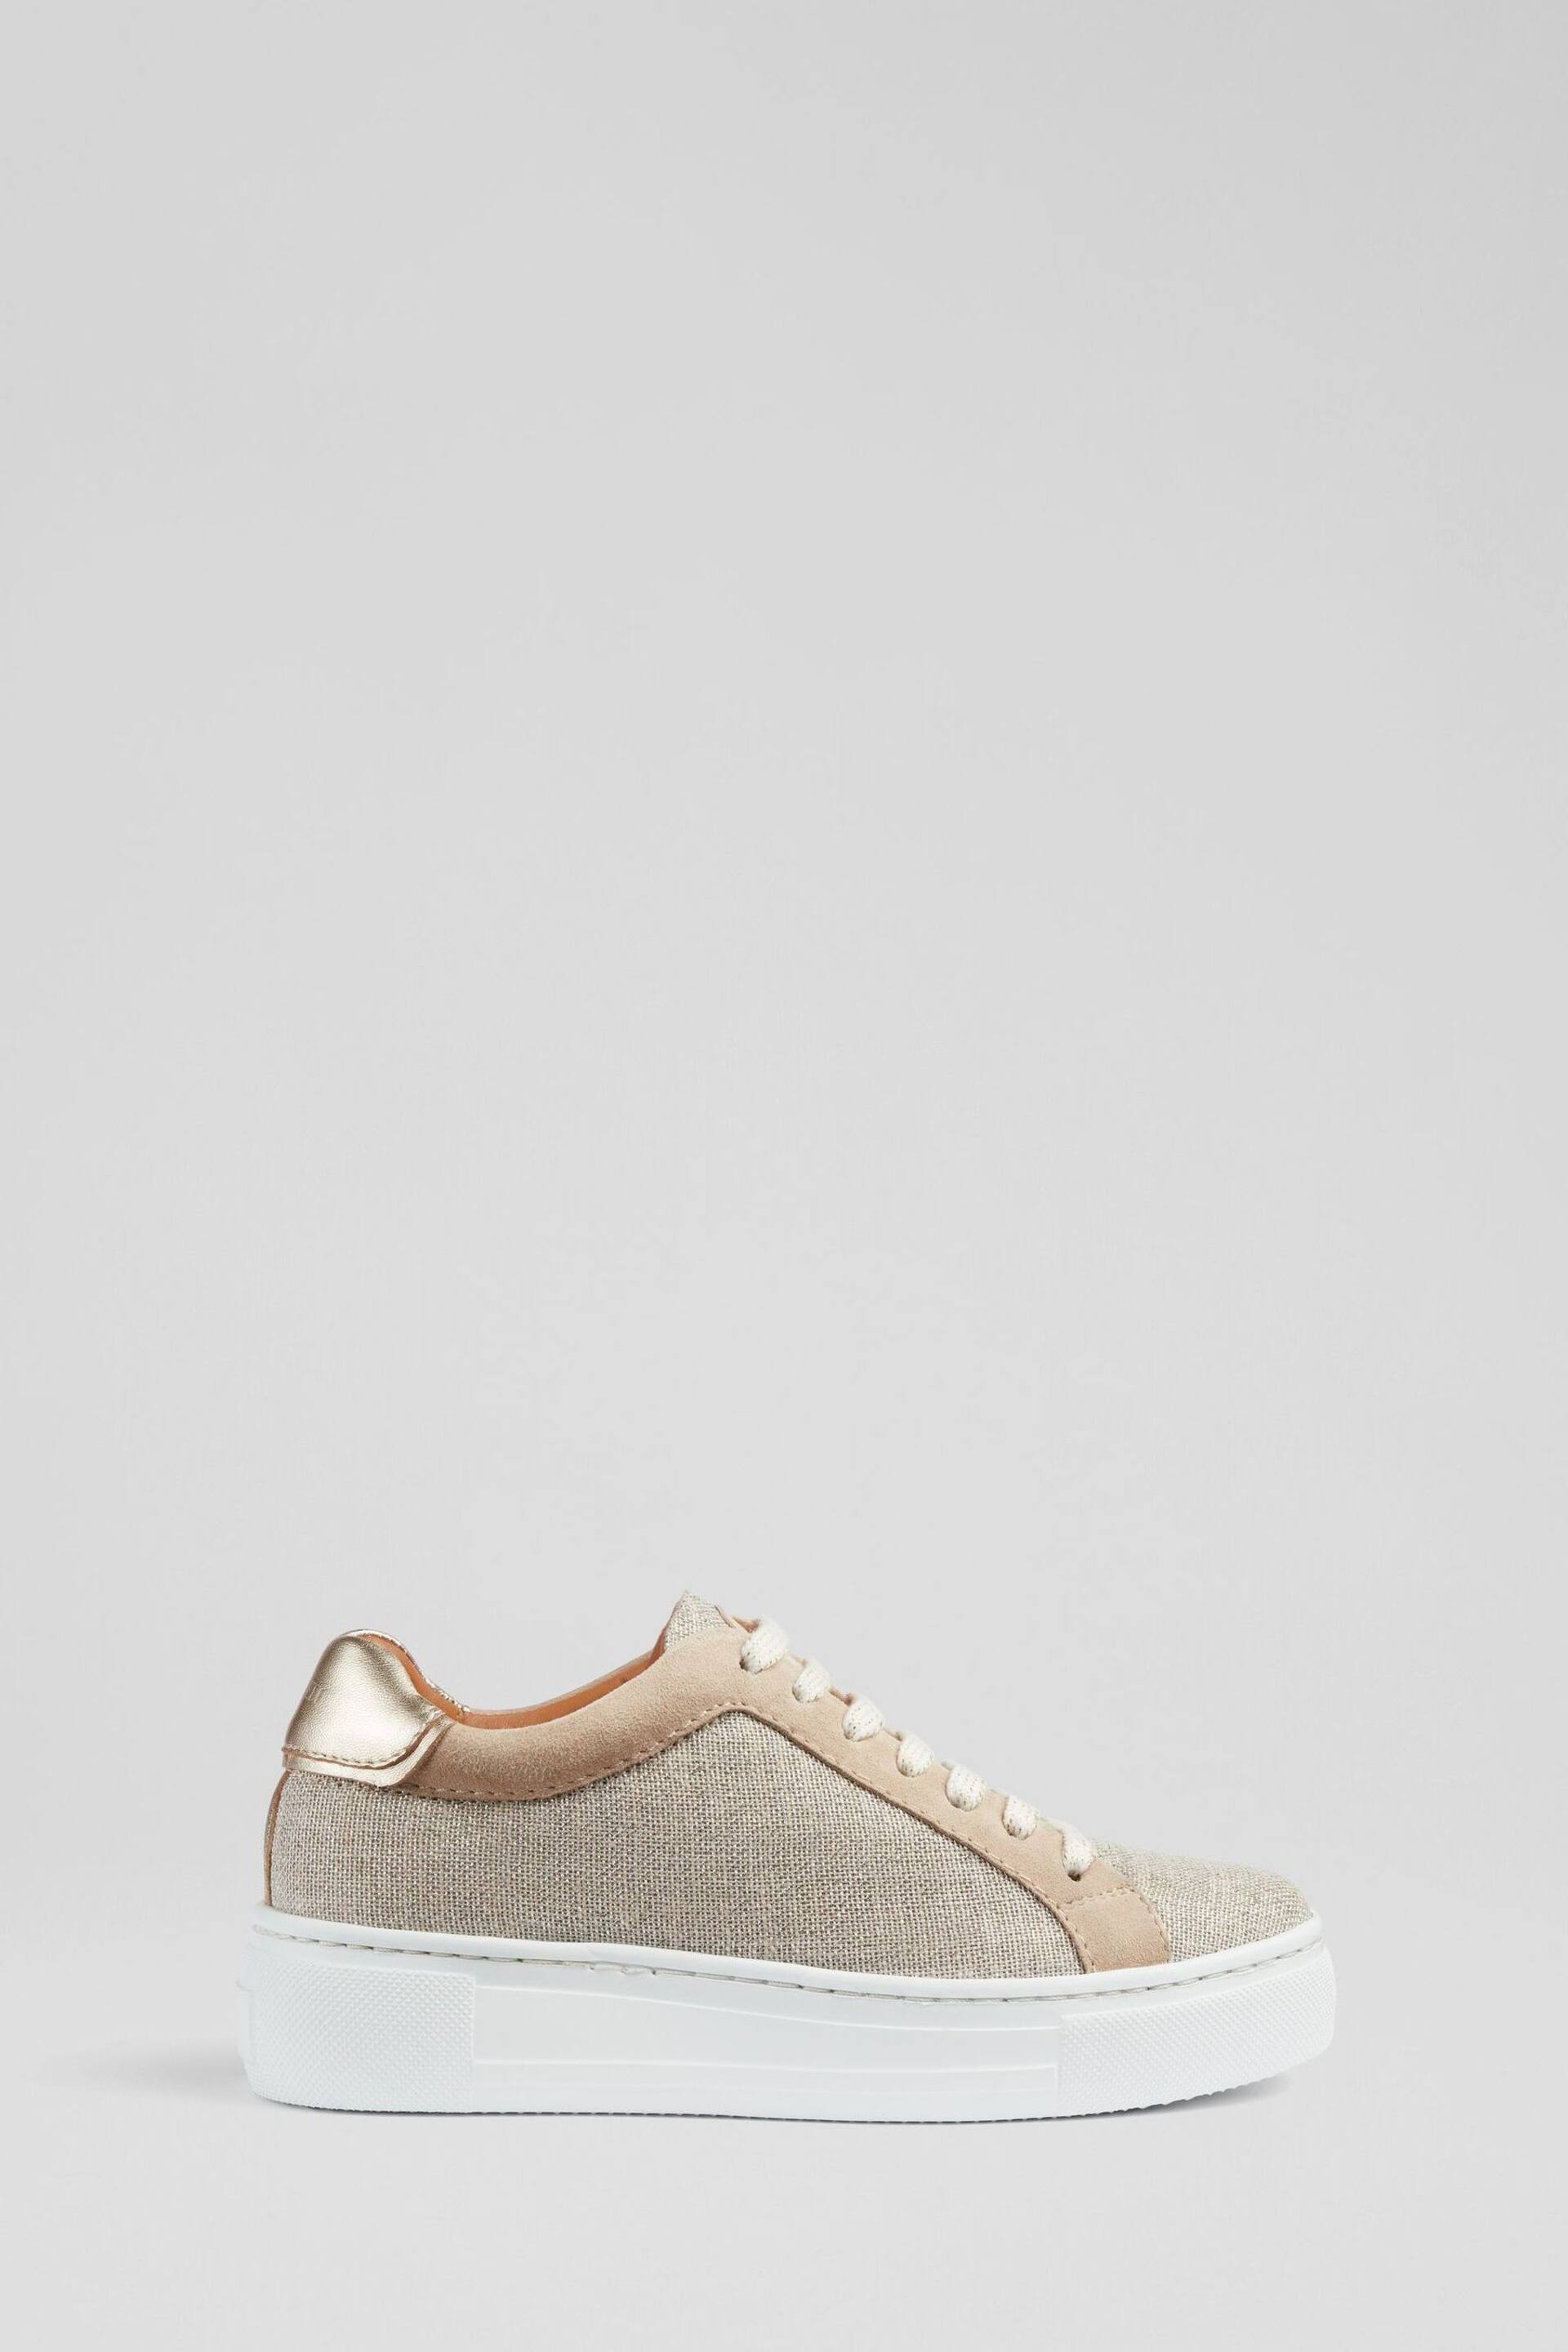 LK Bennett Fabric And Beige Suede Flatform Trainers - Image 1 of 4